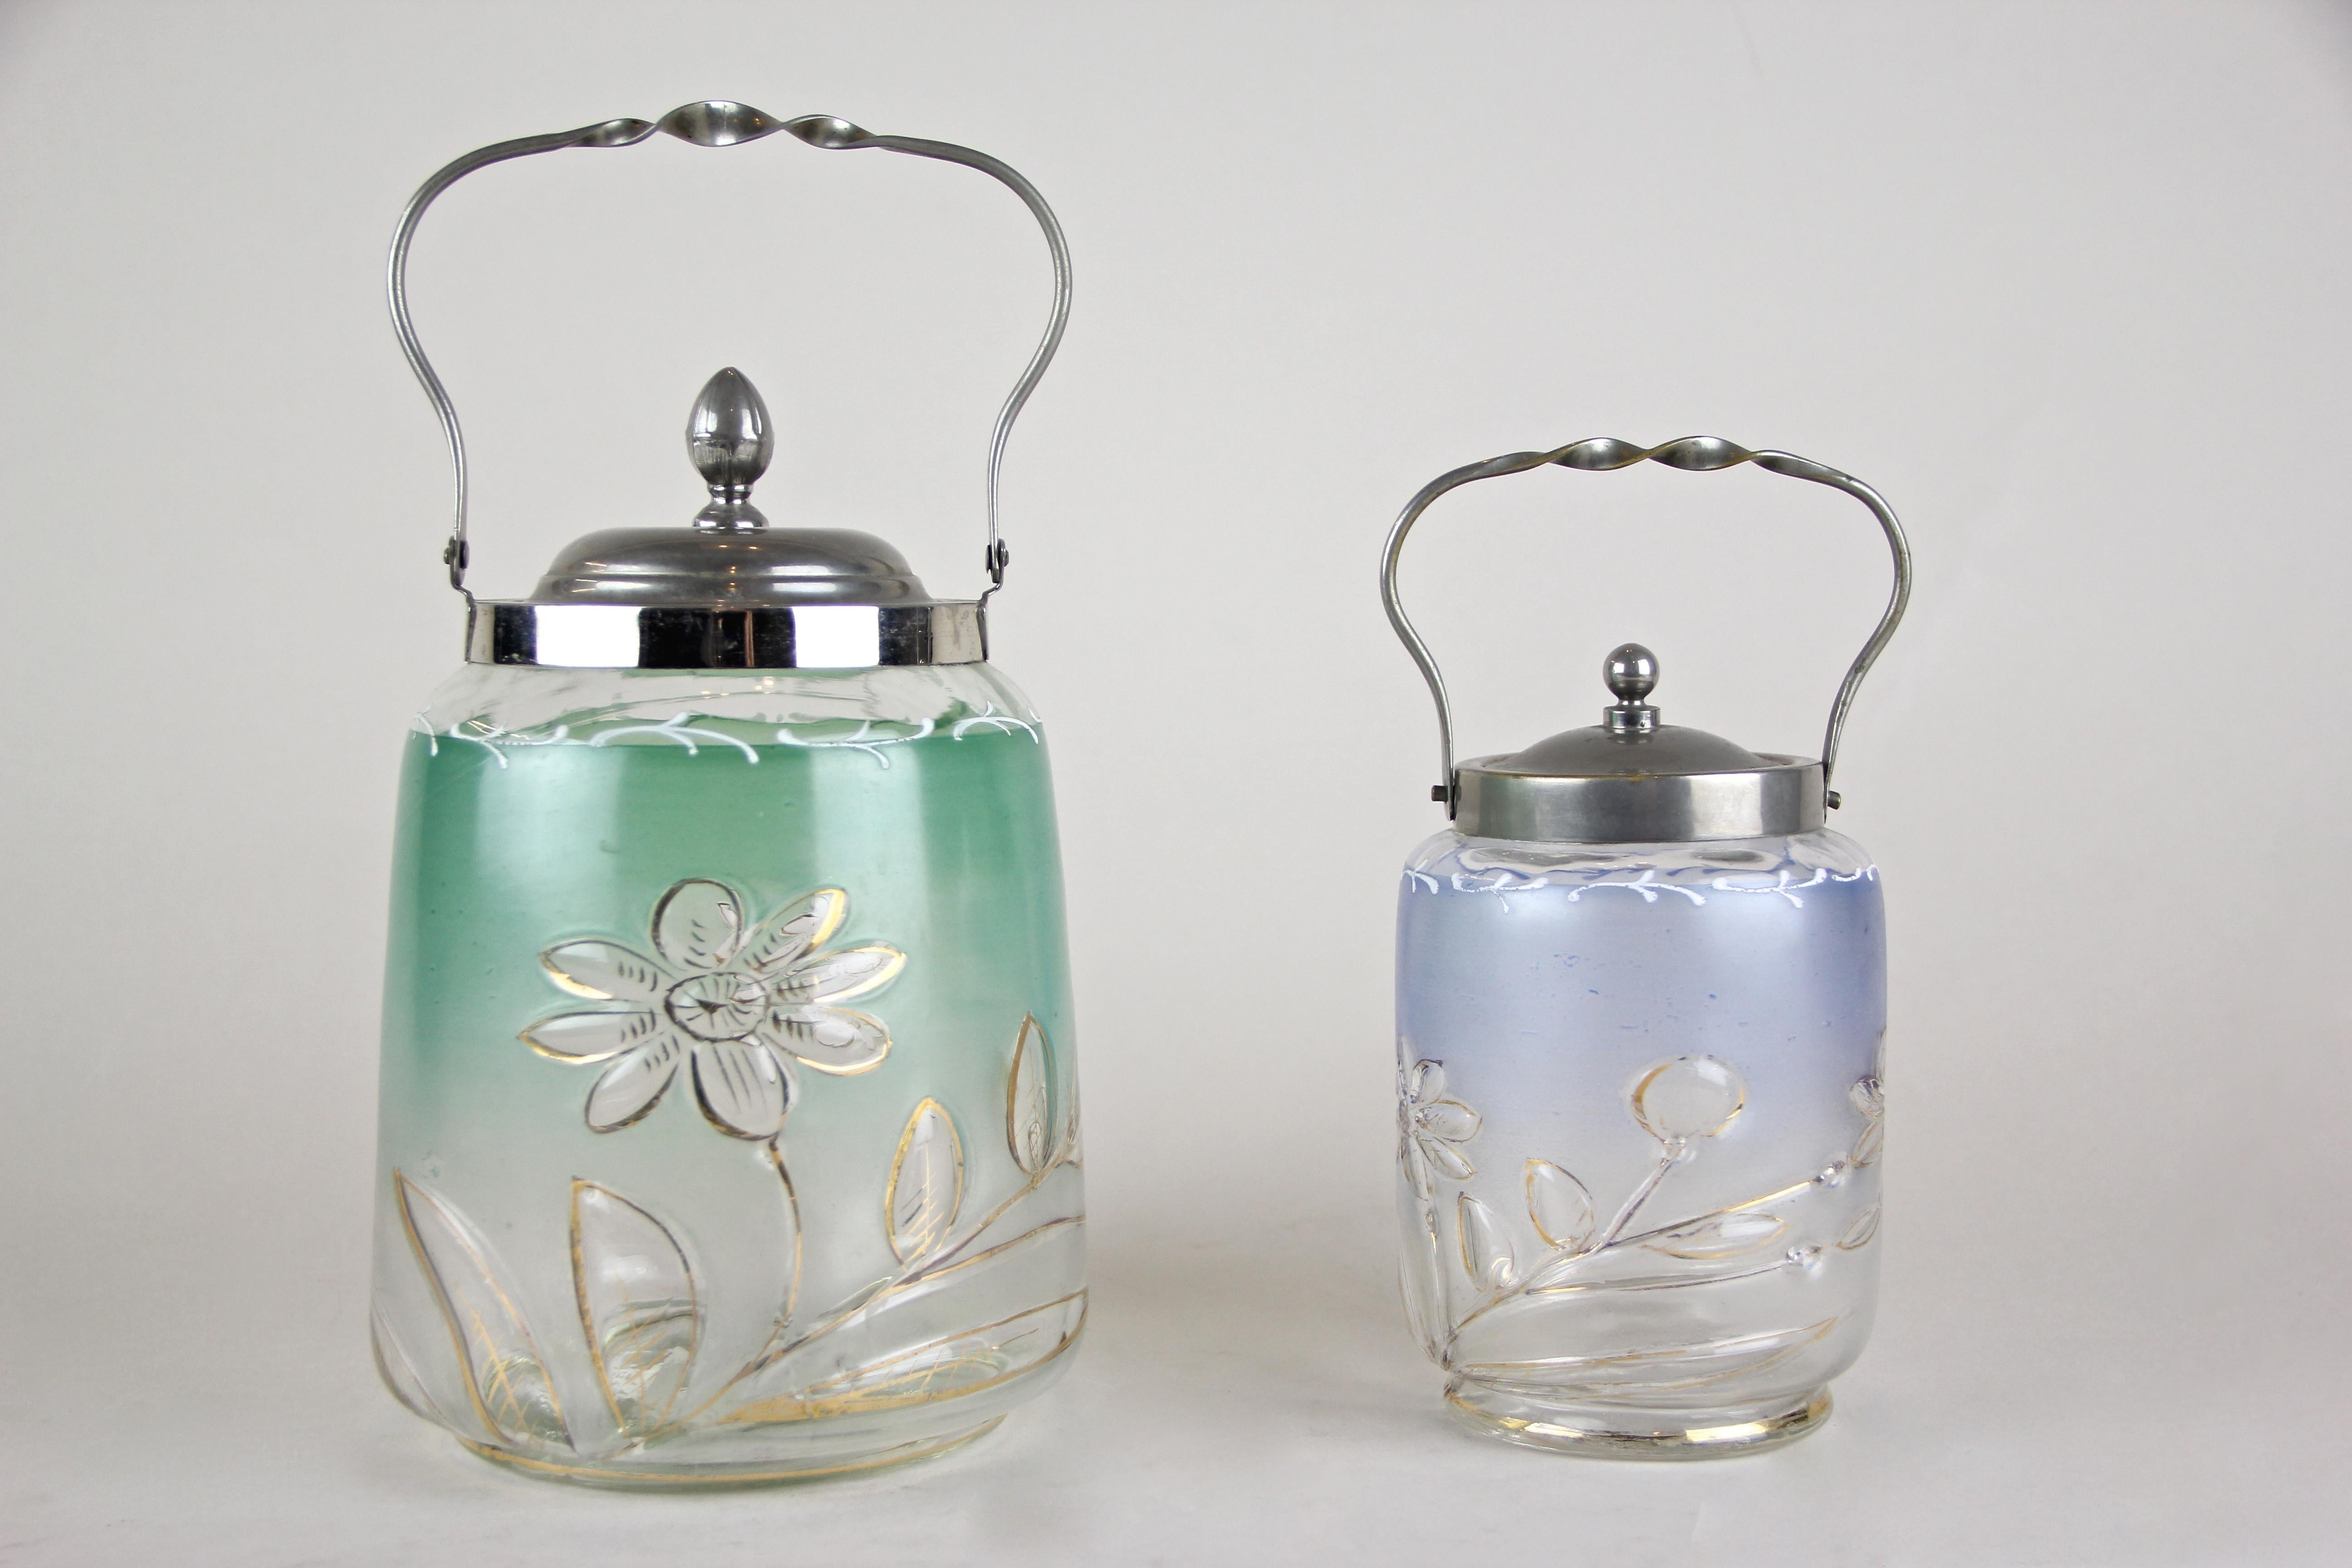 Lovely set of two colored glass jars or Bonbonniere with chromed lid from circa 1920 in Austria. Made of fine mouth blown glass, these two artfully painted jars show a beautiful coloration, the taller one in a light green - the smaller one in a